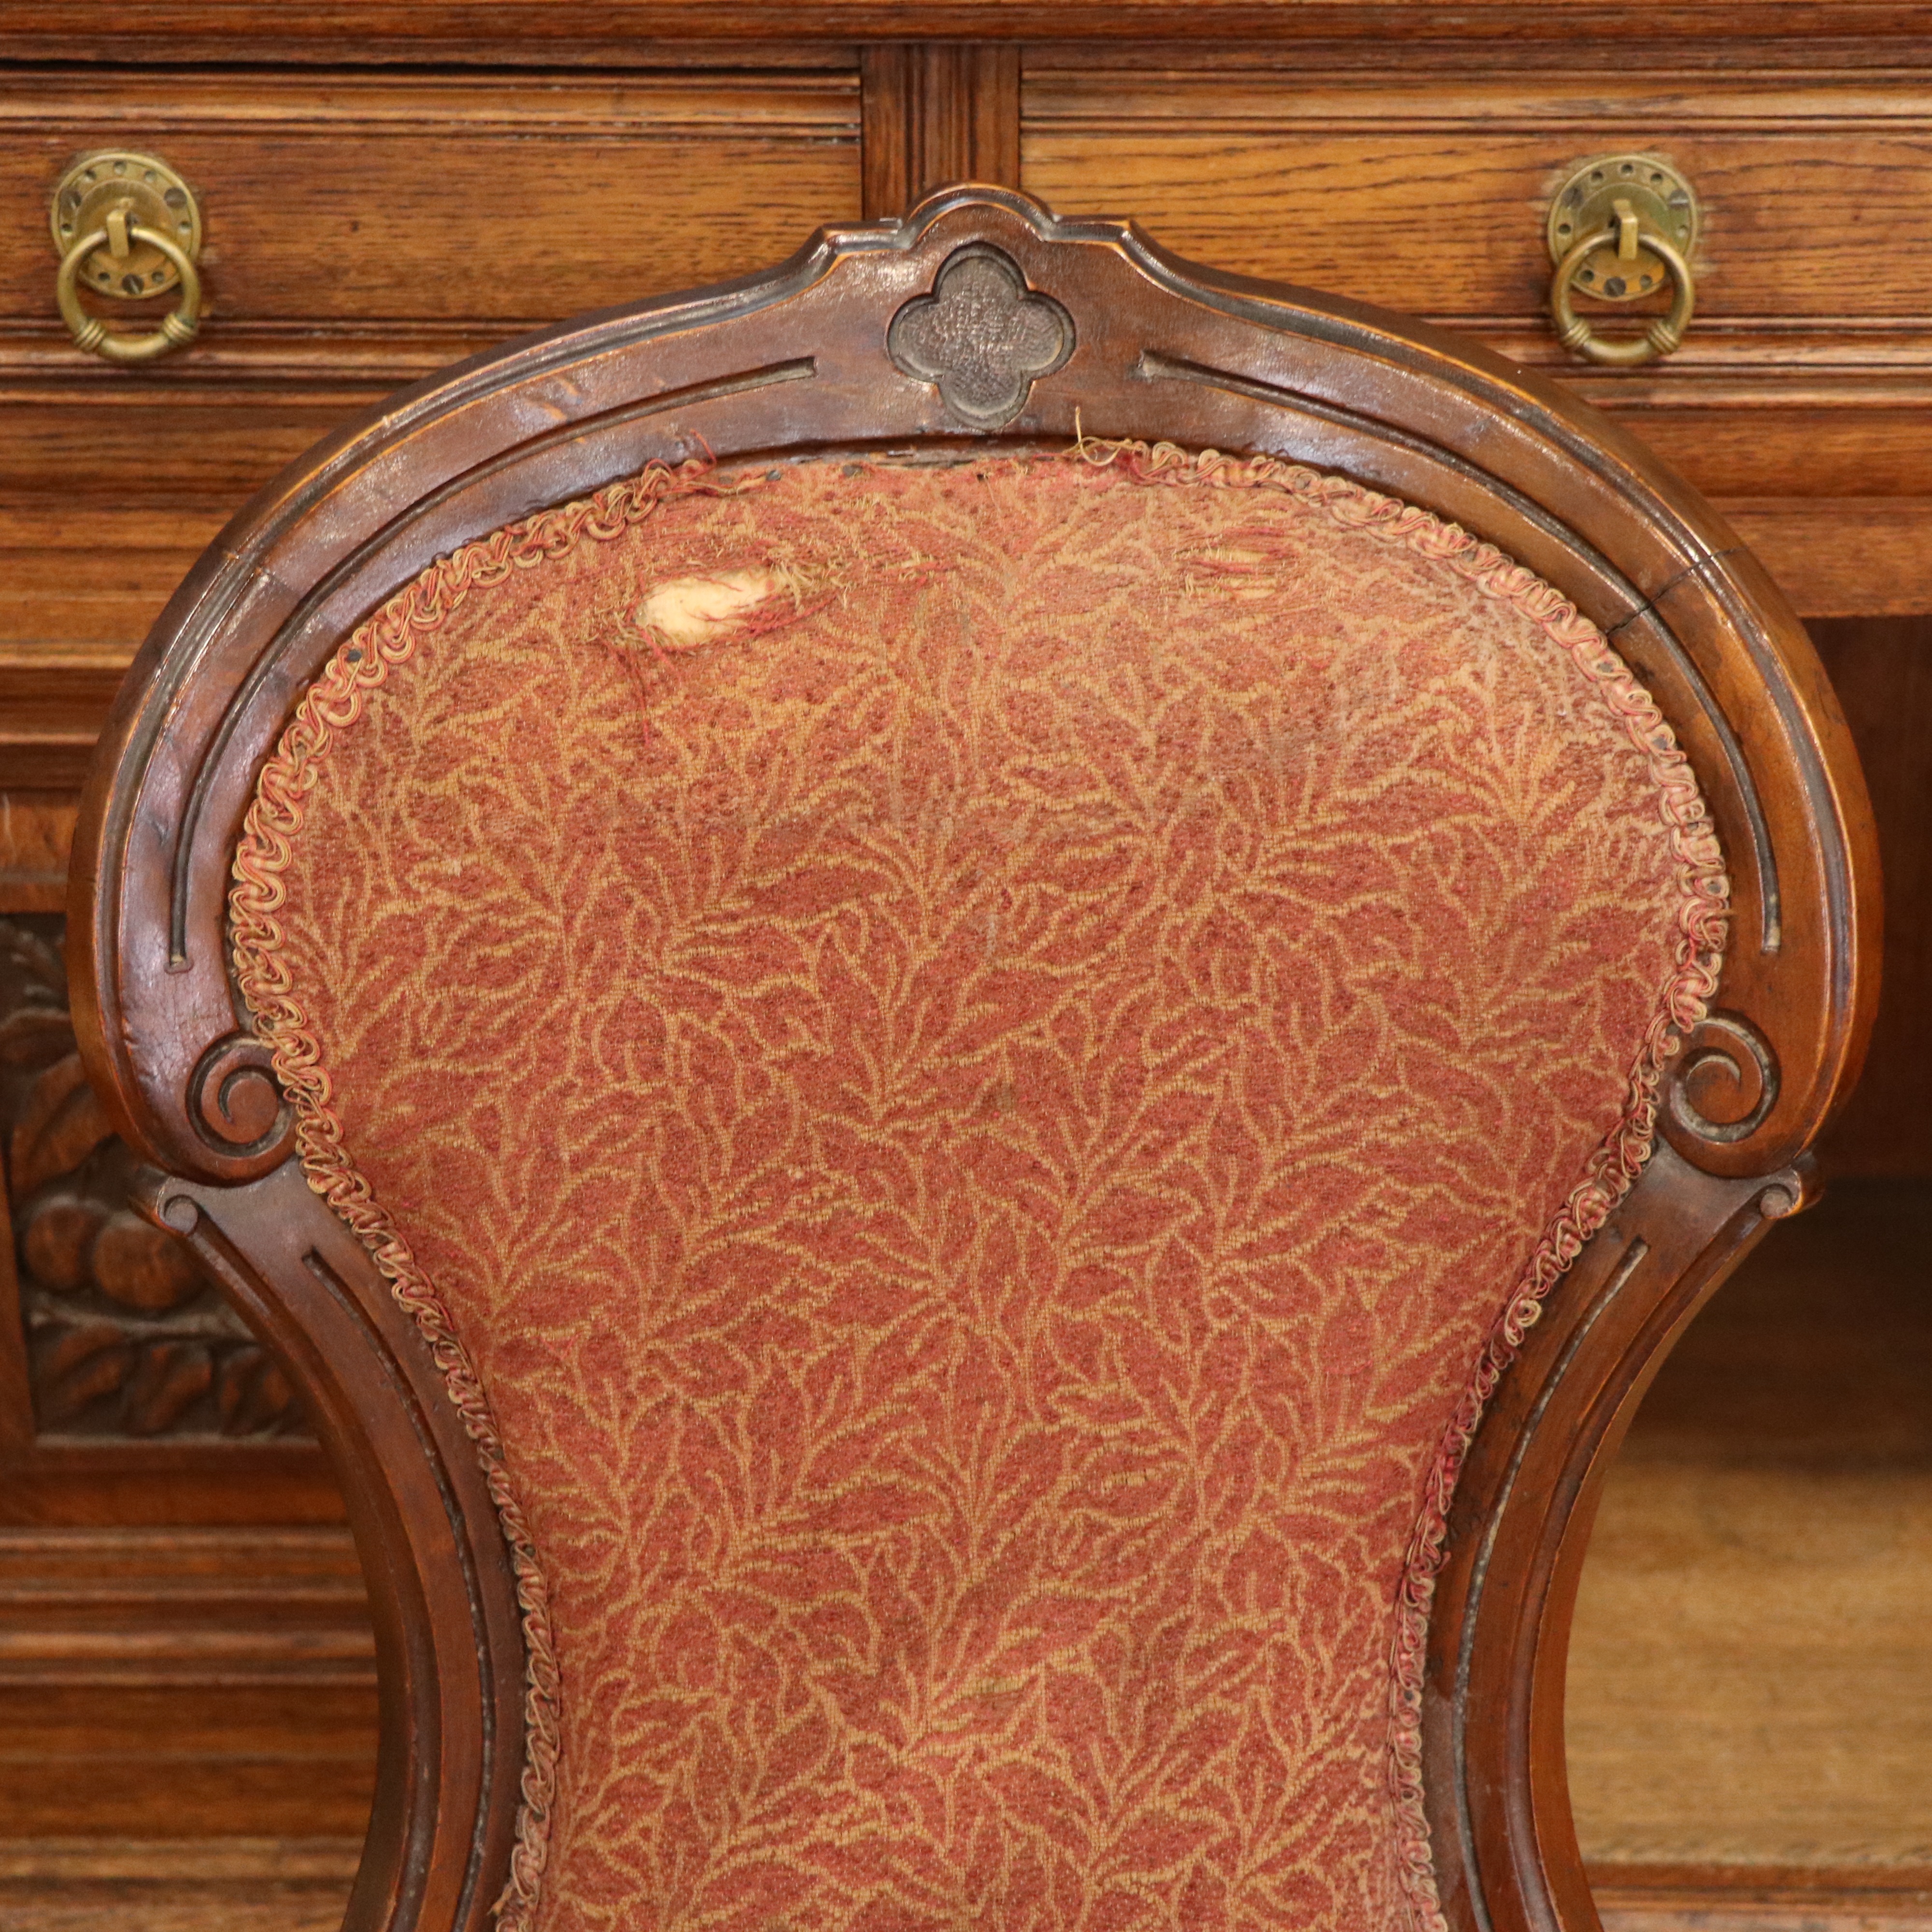 A Victorian upholstered spoon-back nursing chair - Image 3 of 3